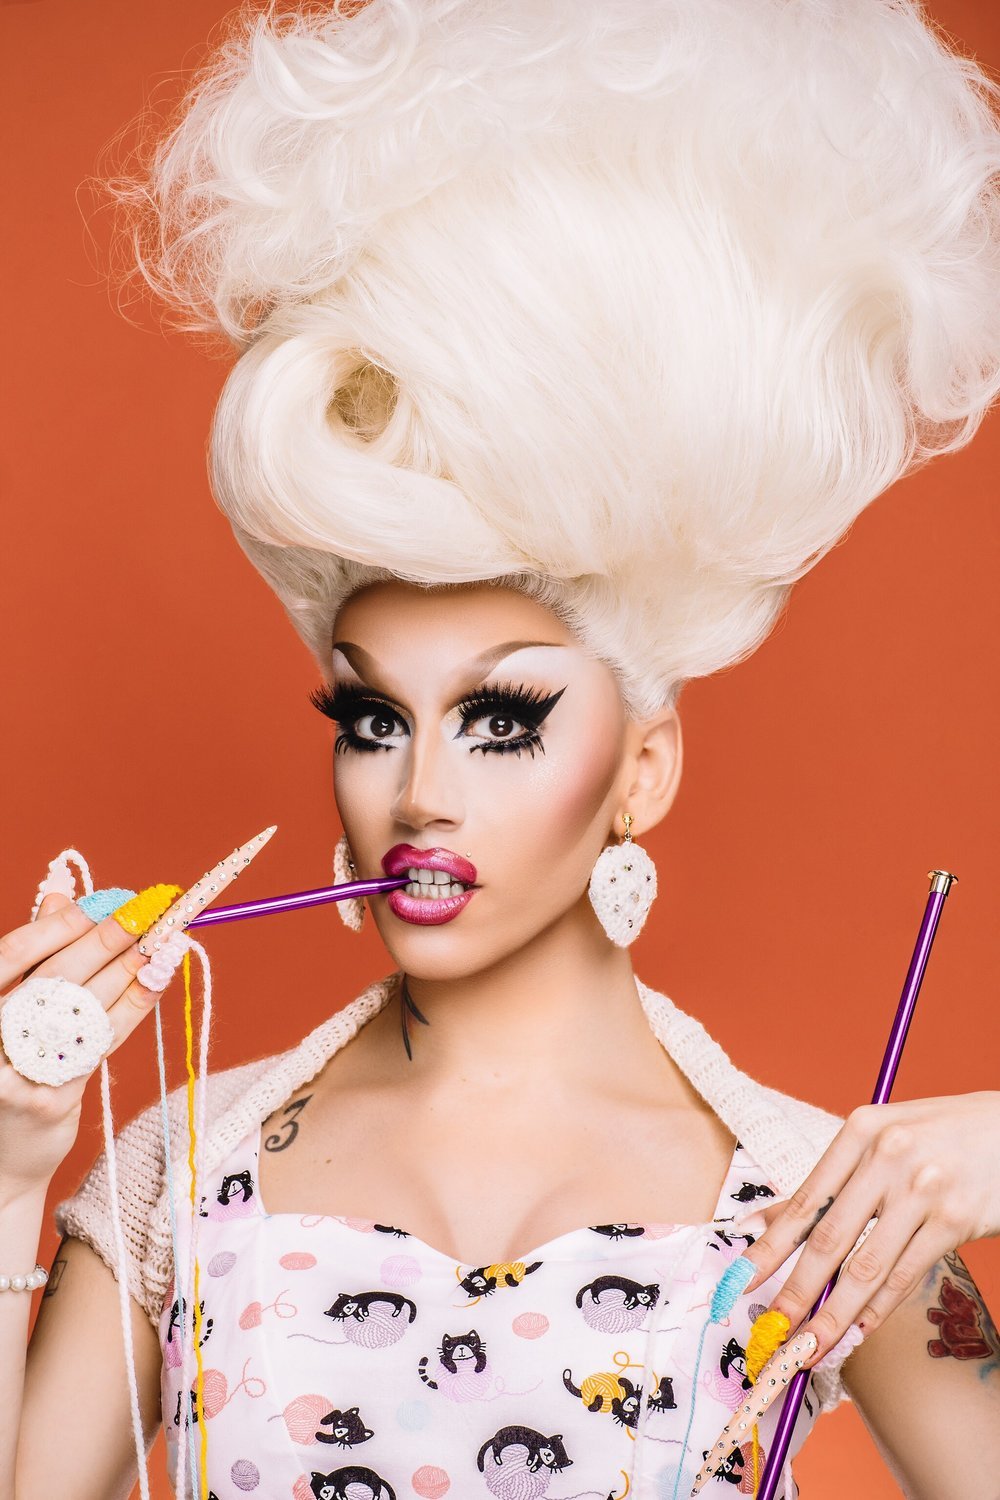 a drag queen biting on a purple metallic knitting needle